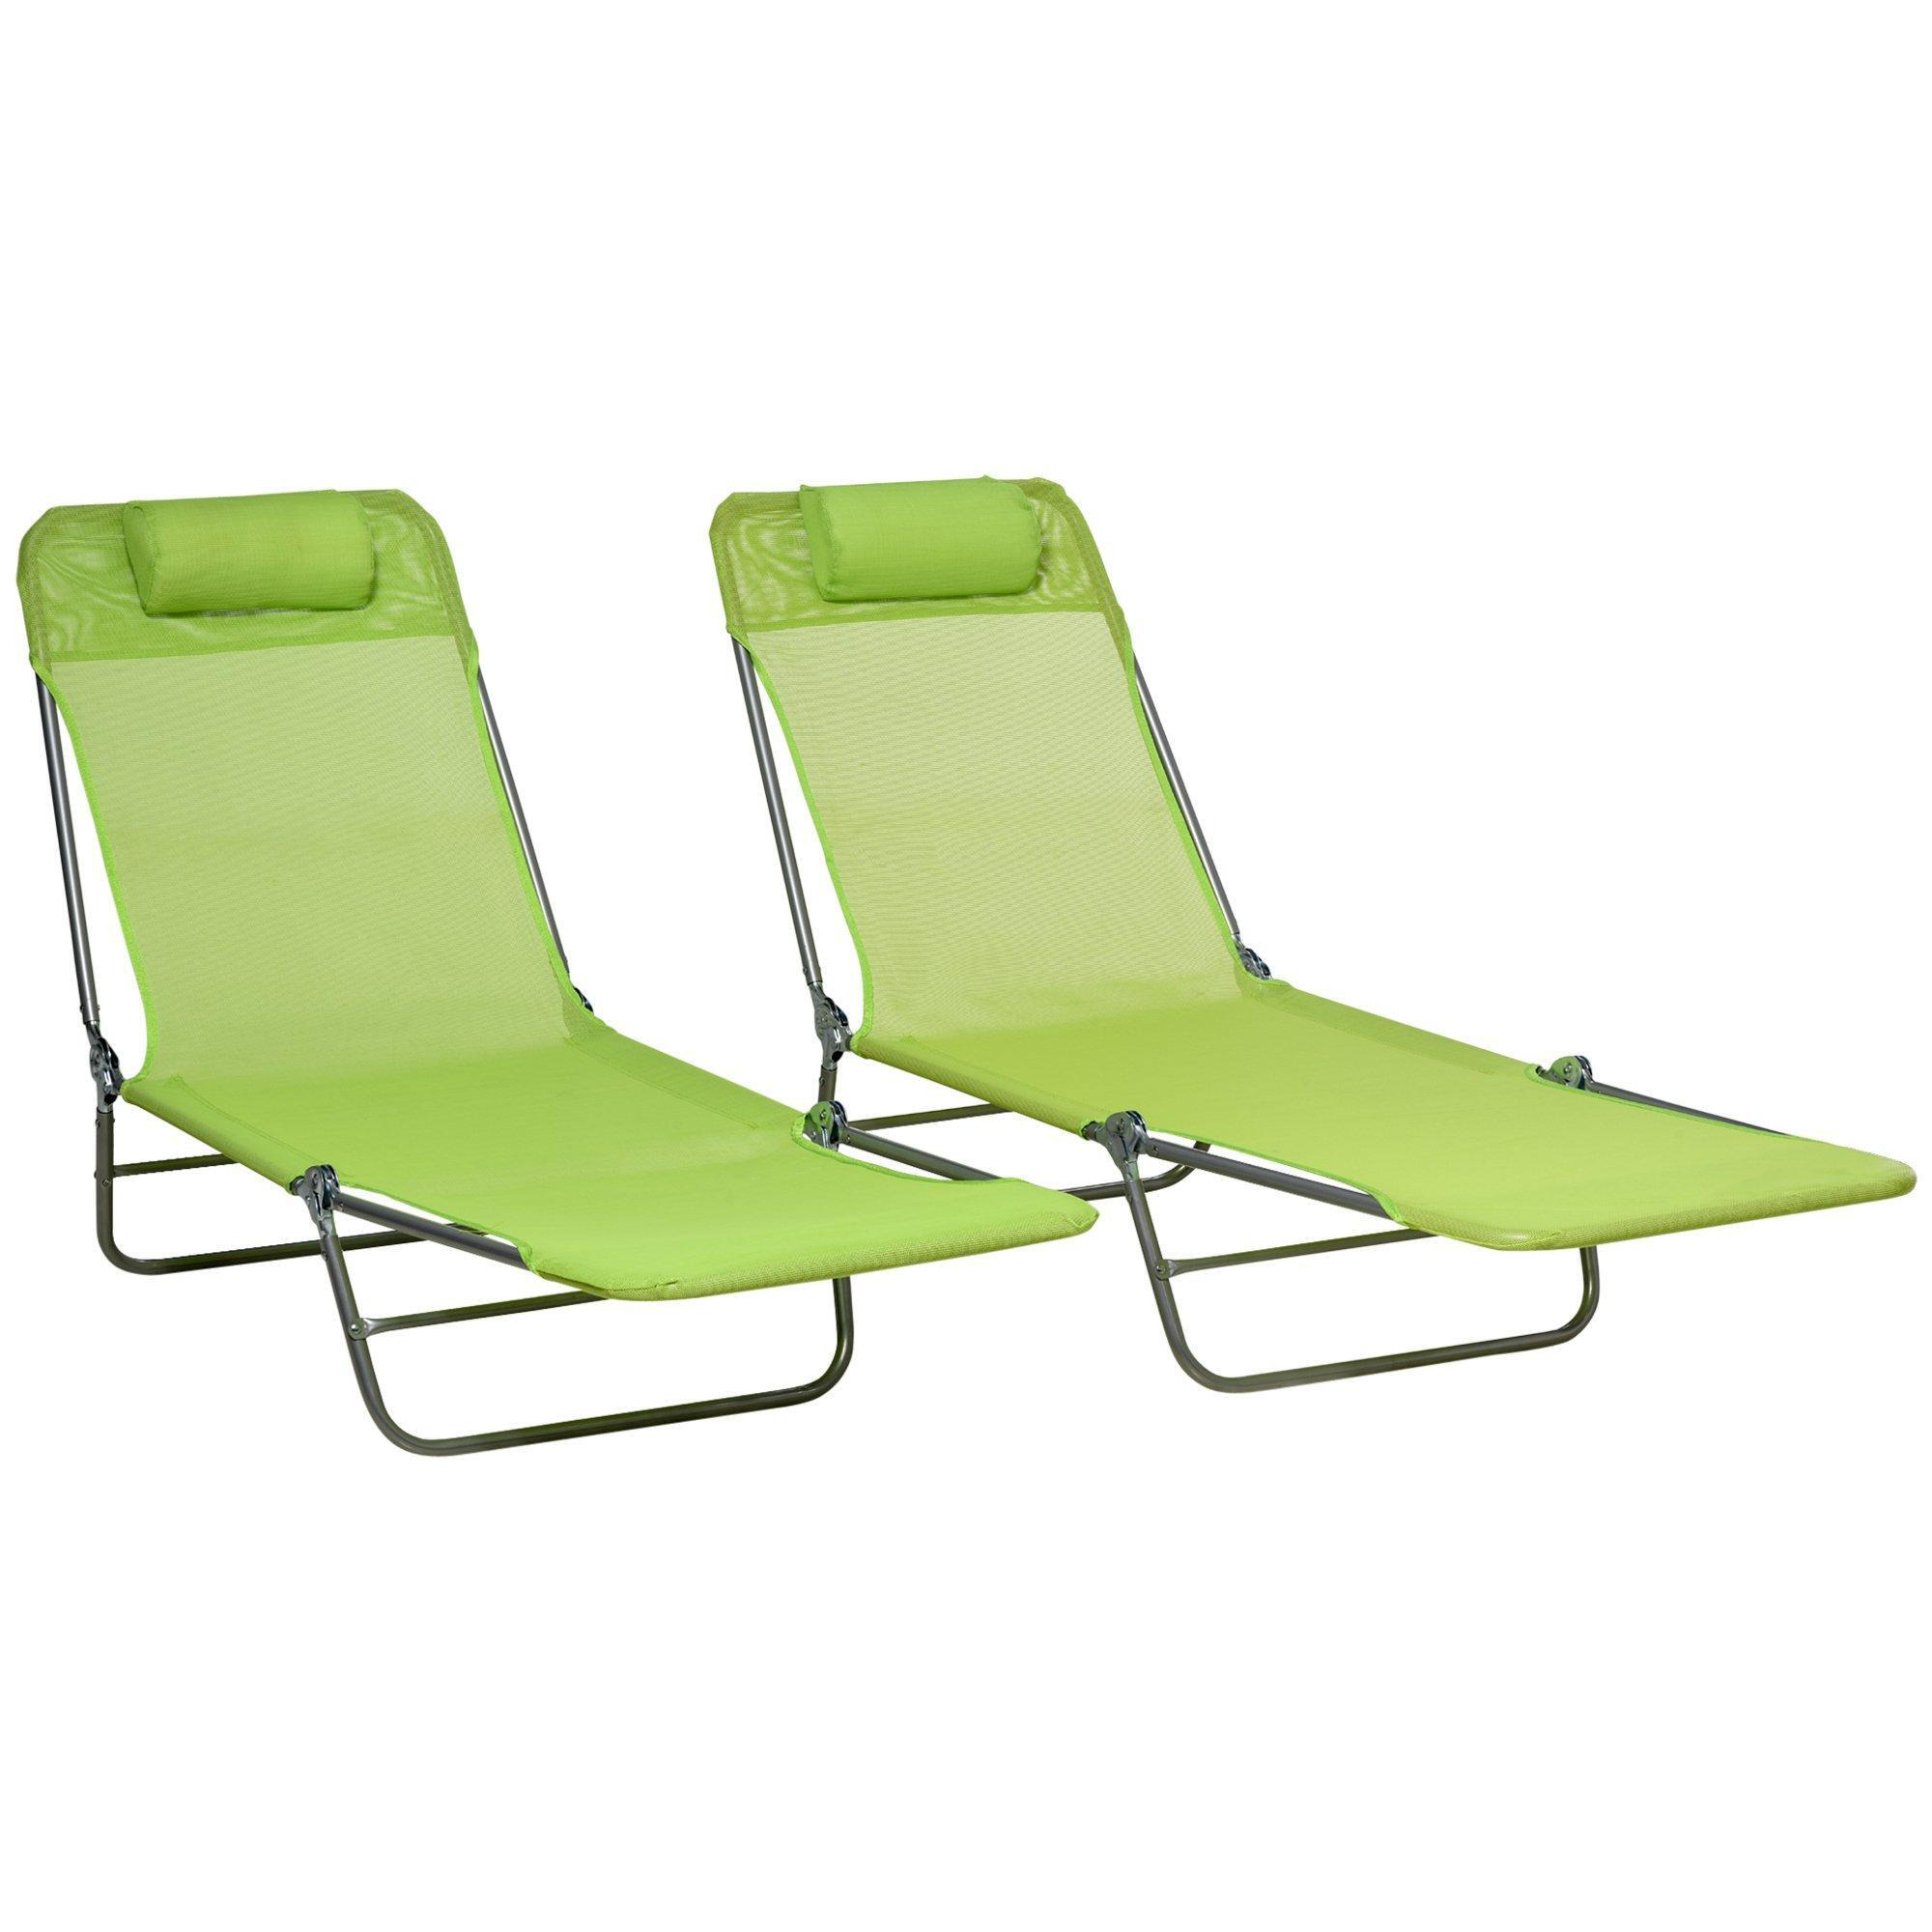 2 Piece Folding Sun Loungers with Adjustable Backrest and Pillow, Green - image 1